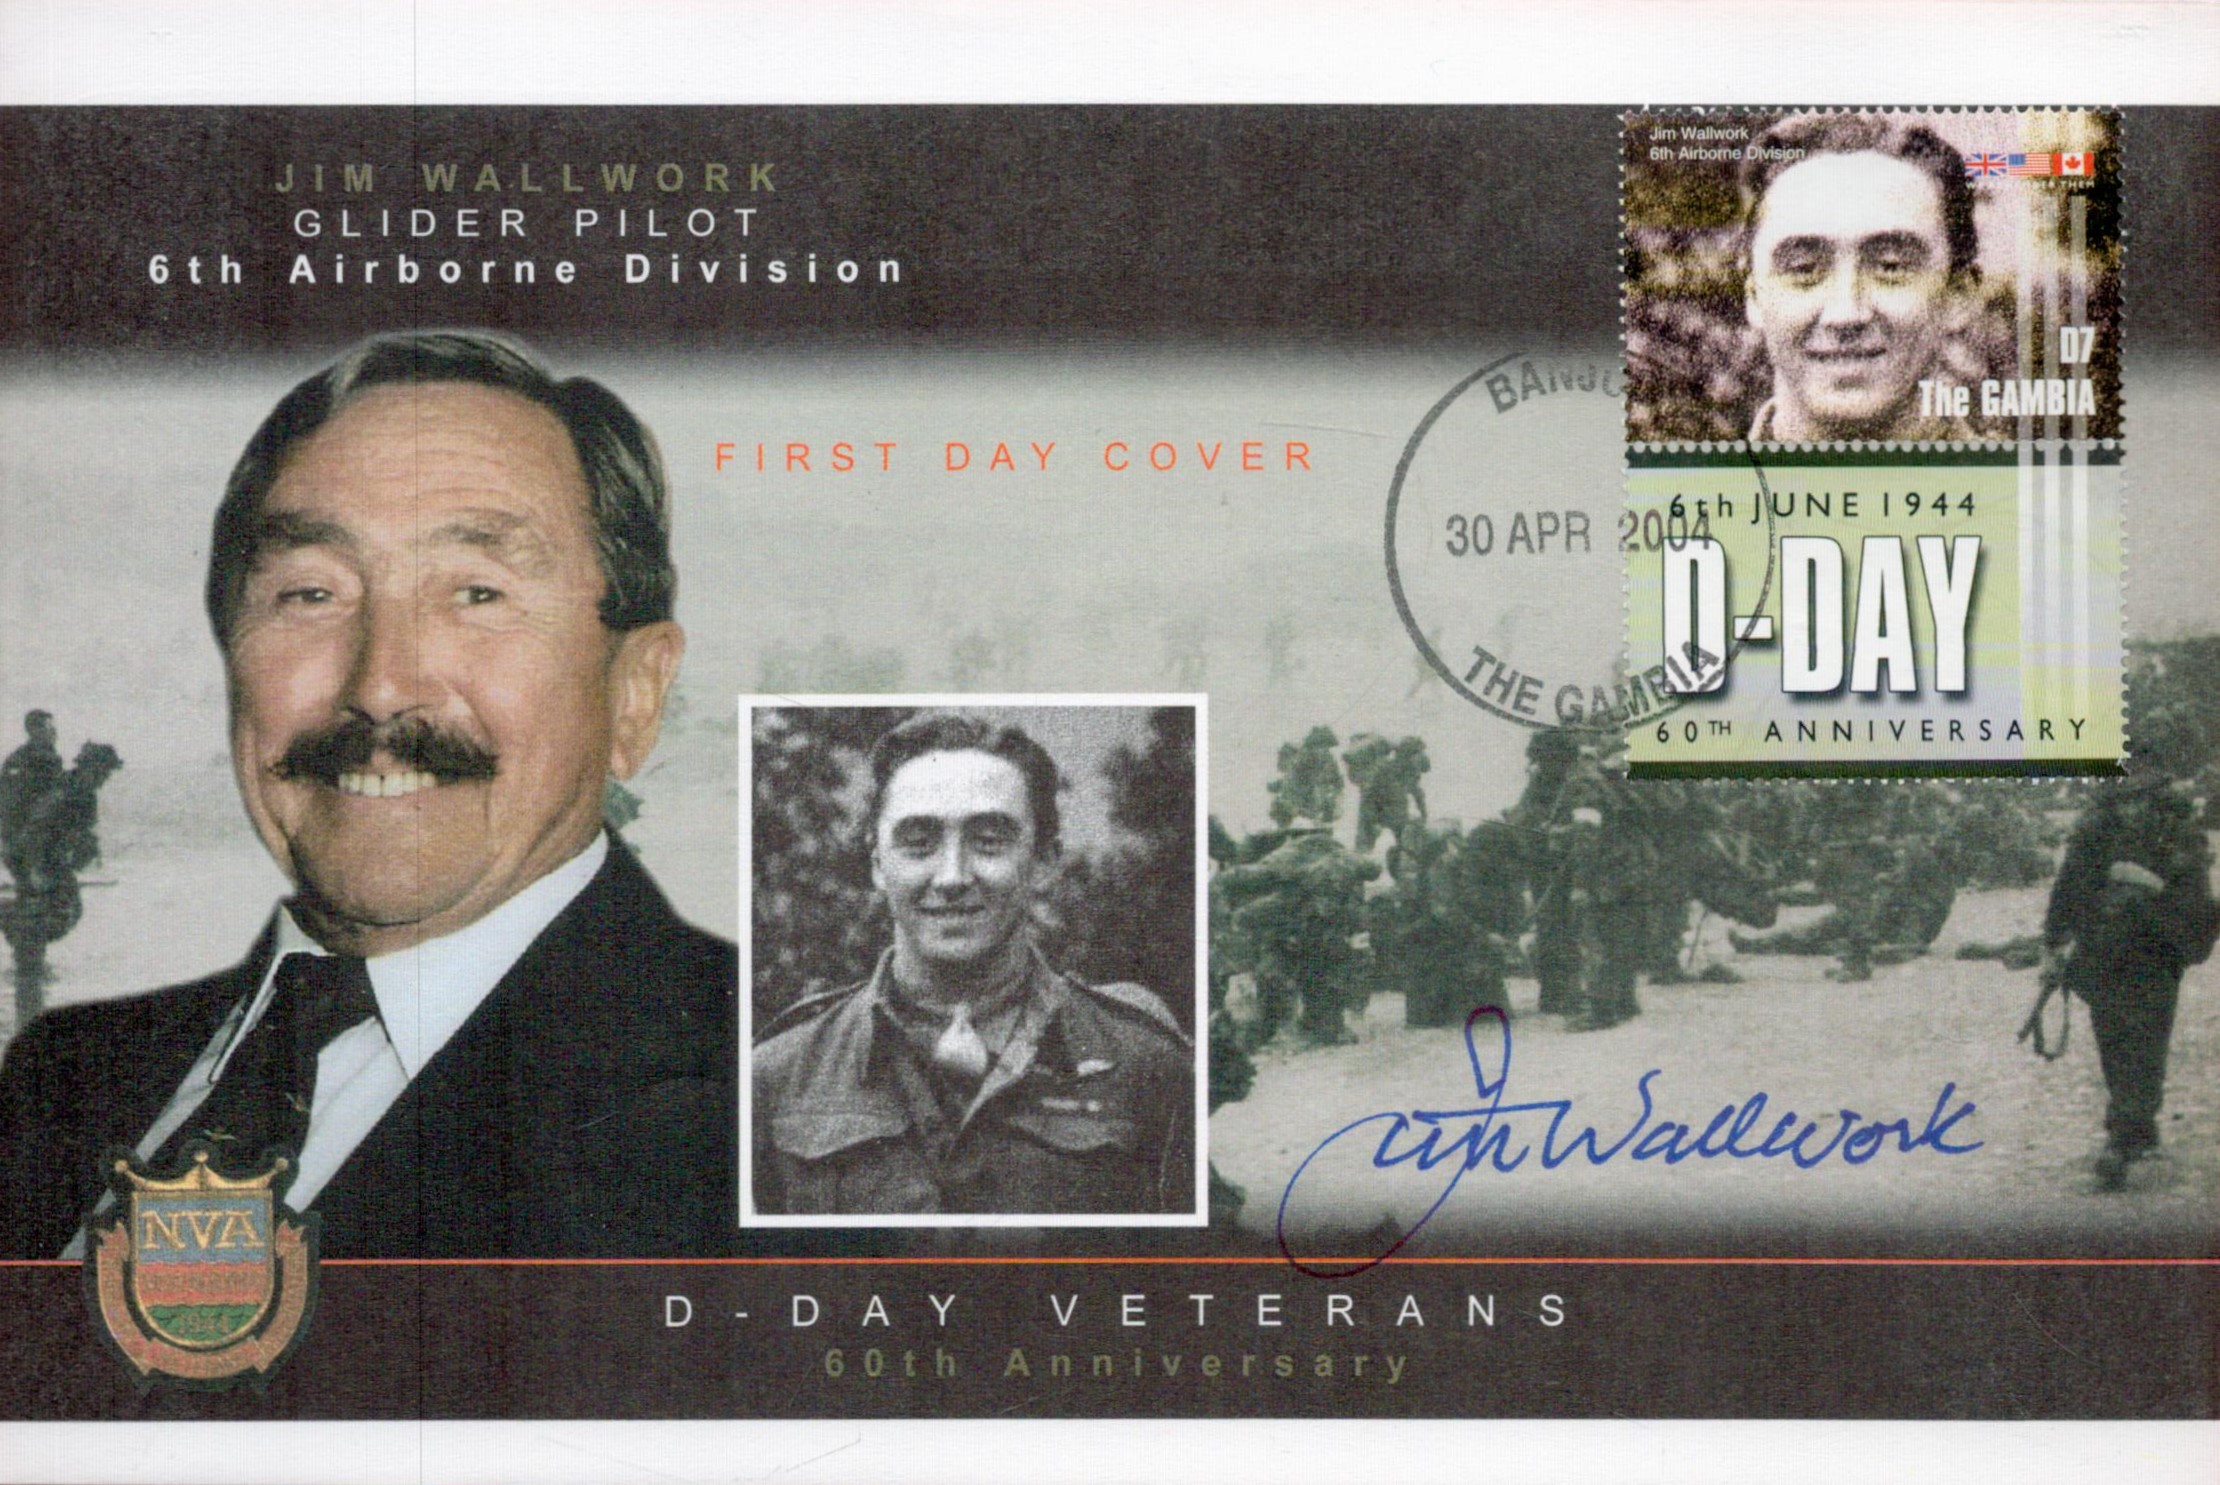 Jim Wallwork Signed on His own D-Day Veterans First Day Cover. The Gambia Stamp with 30 Apr 2004